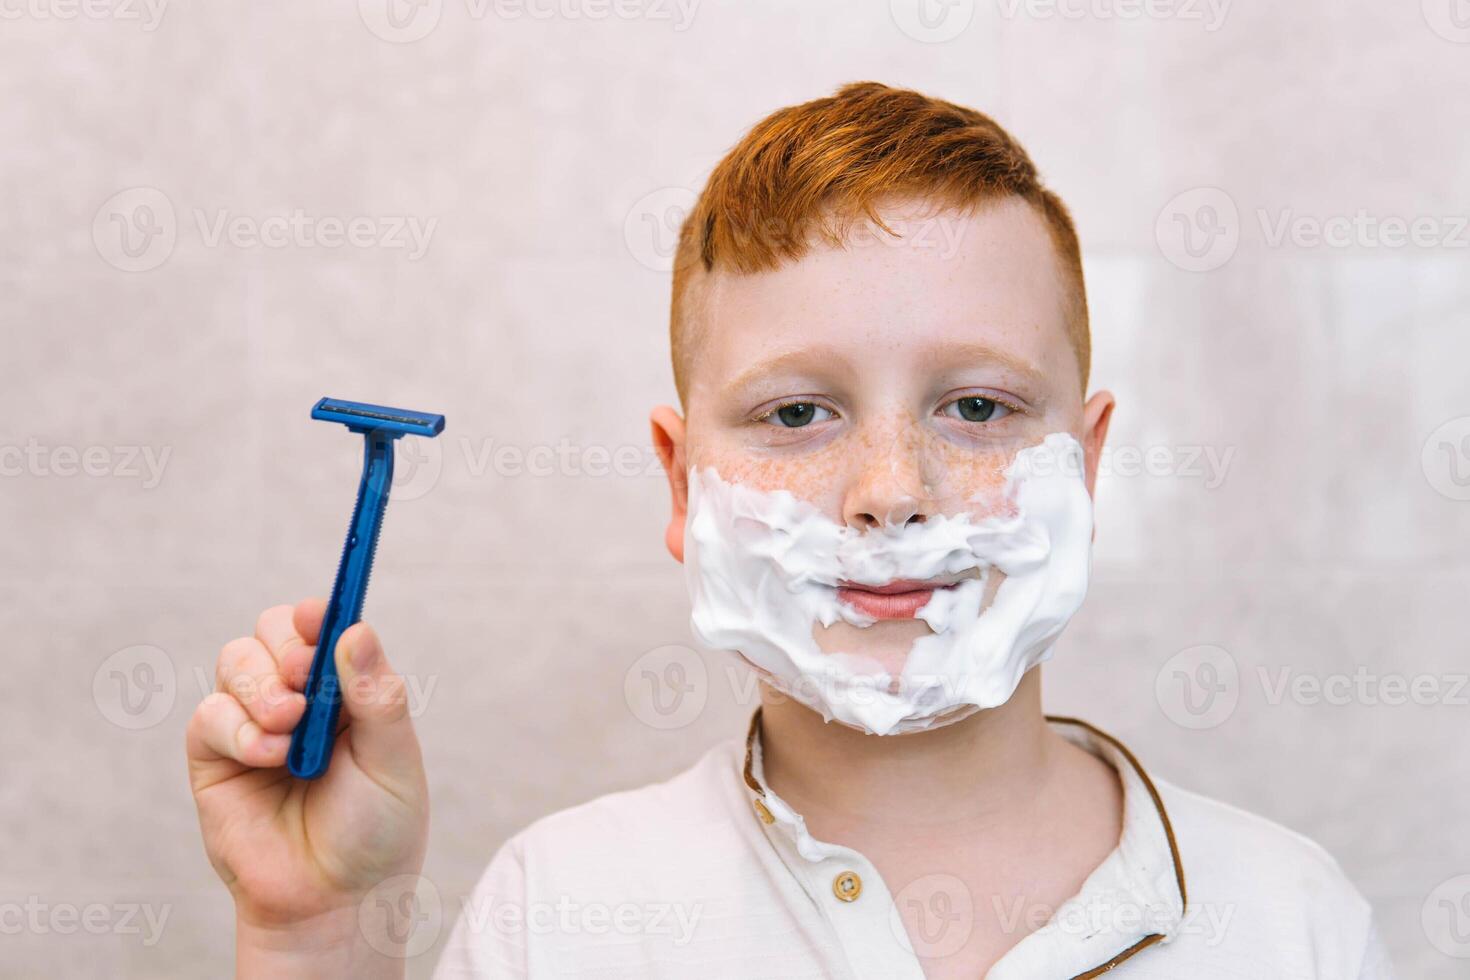 Funny boy in the bath with shaving cream on his face and shaving razor photo